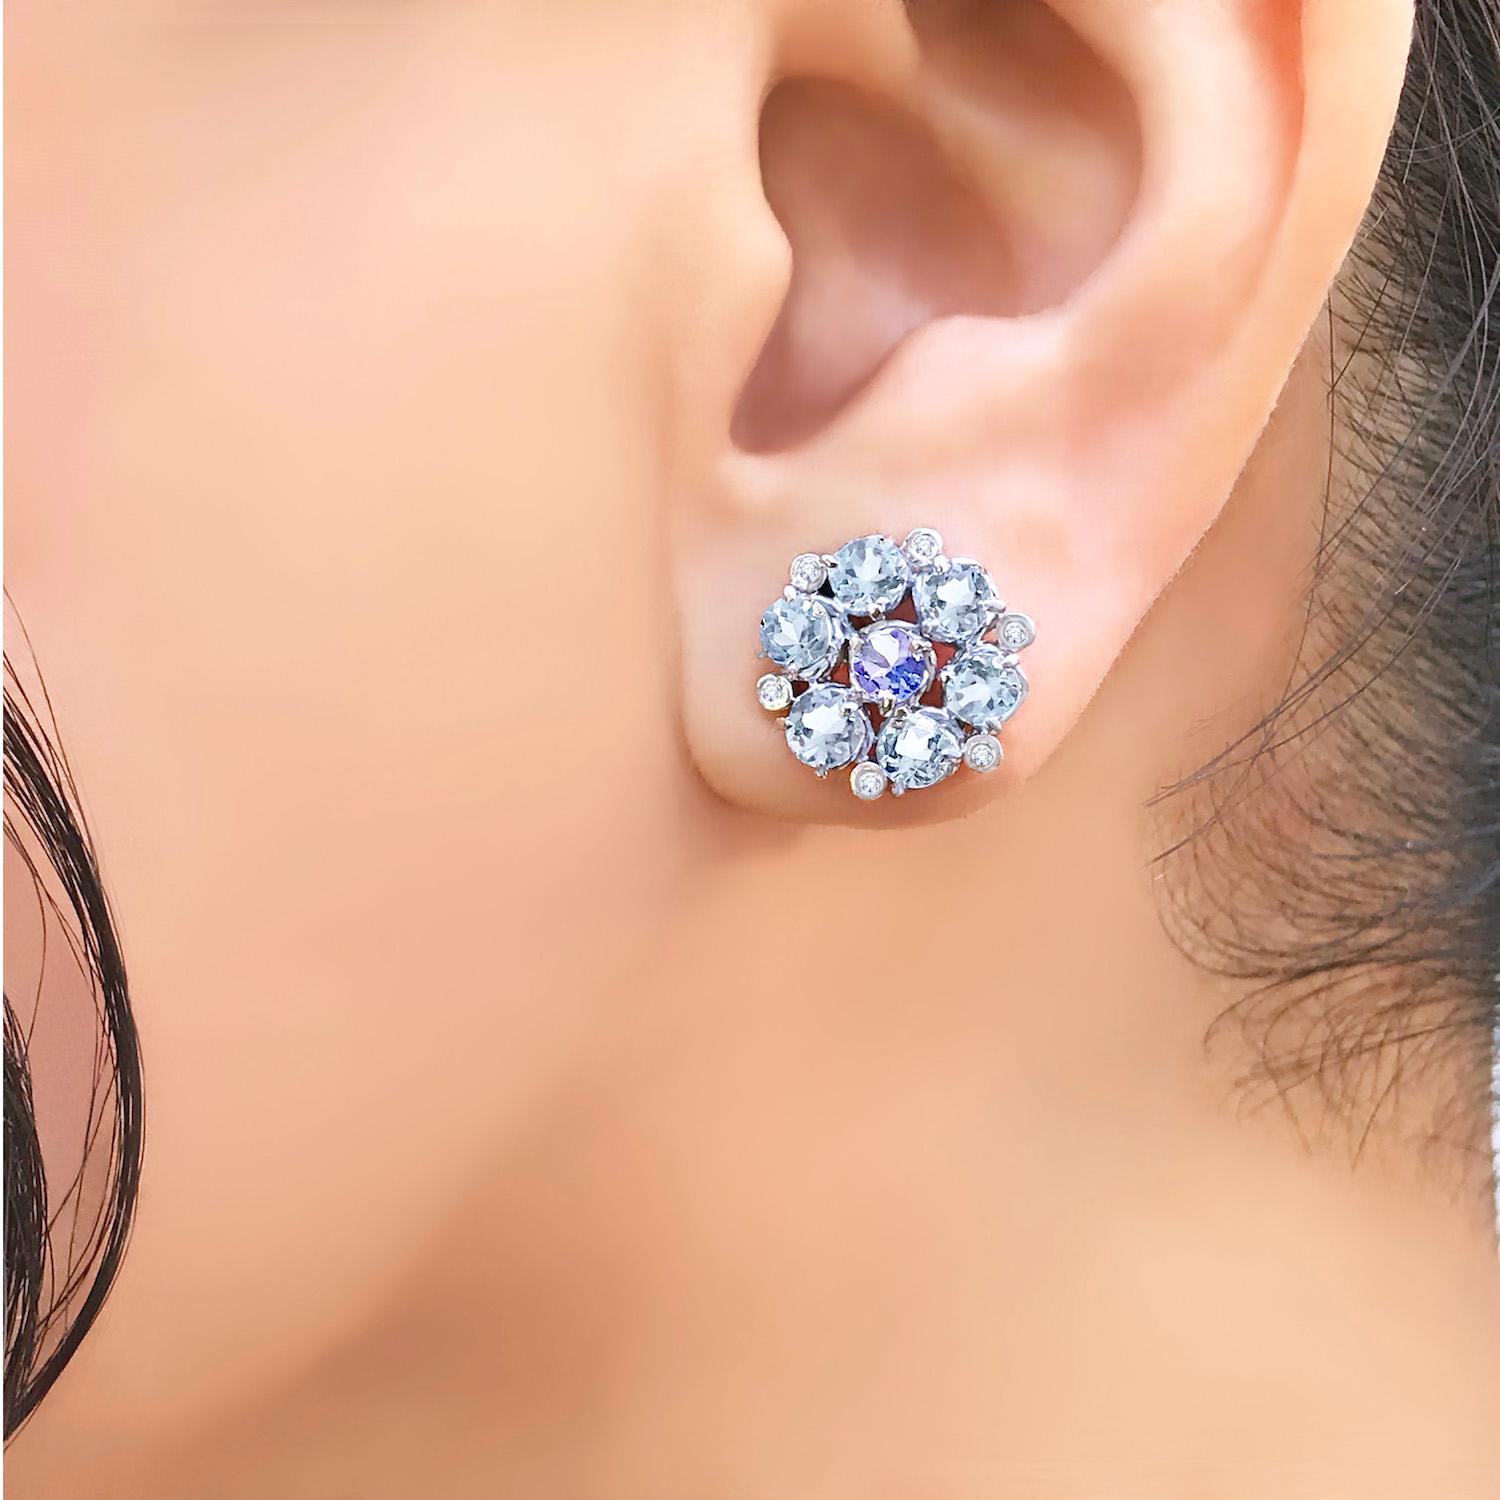 Aphrodite Aquamarine and Tanzanite Bouquet Cluster Studs with diamond accents – the perfect statement stud. Wear these on an evening out for some added sparkle, or elevate your everyday, classic stud. Post secure with friction ear backing. Made to